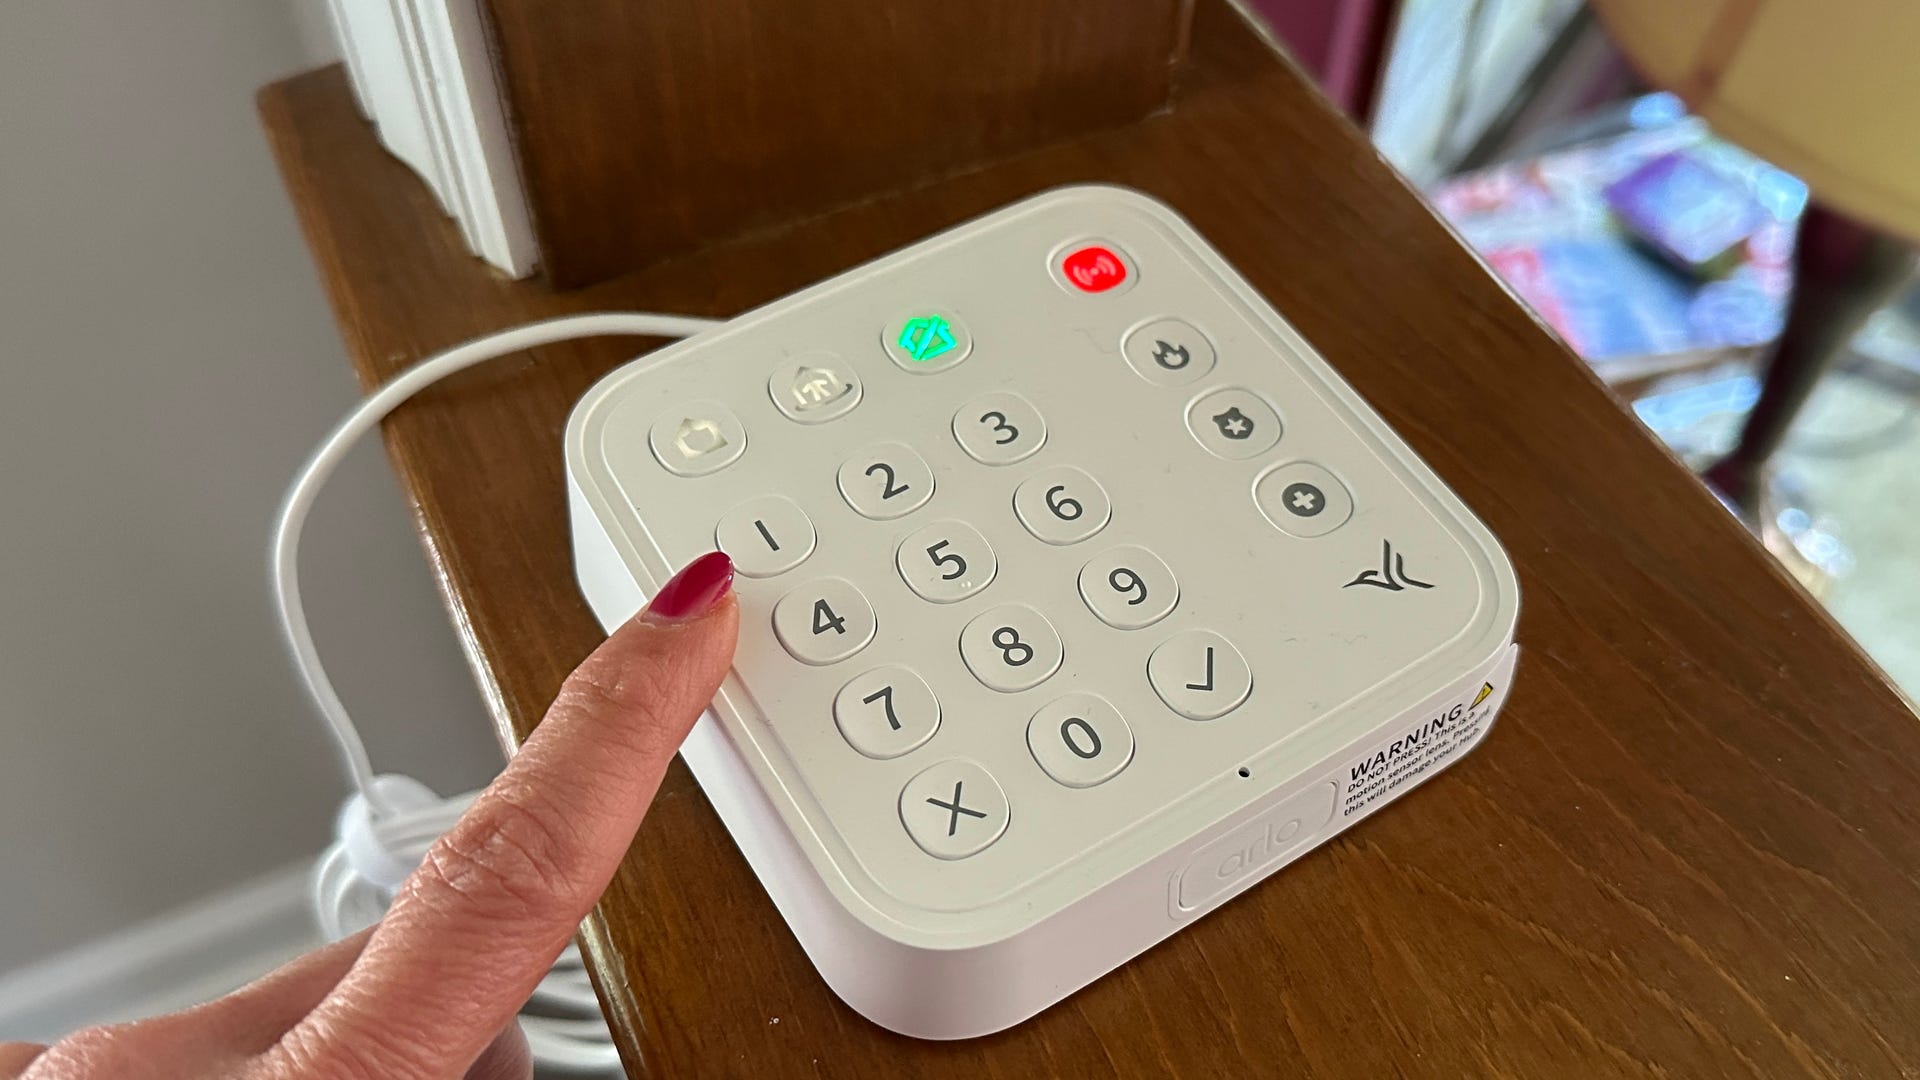 A woman's finger reaches to touch a button on the Arlo Home Security System's keypad hub.